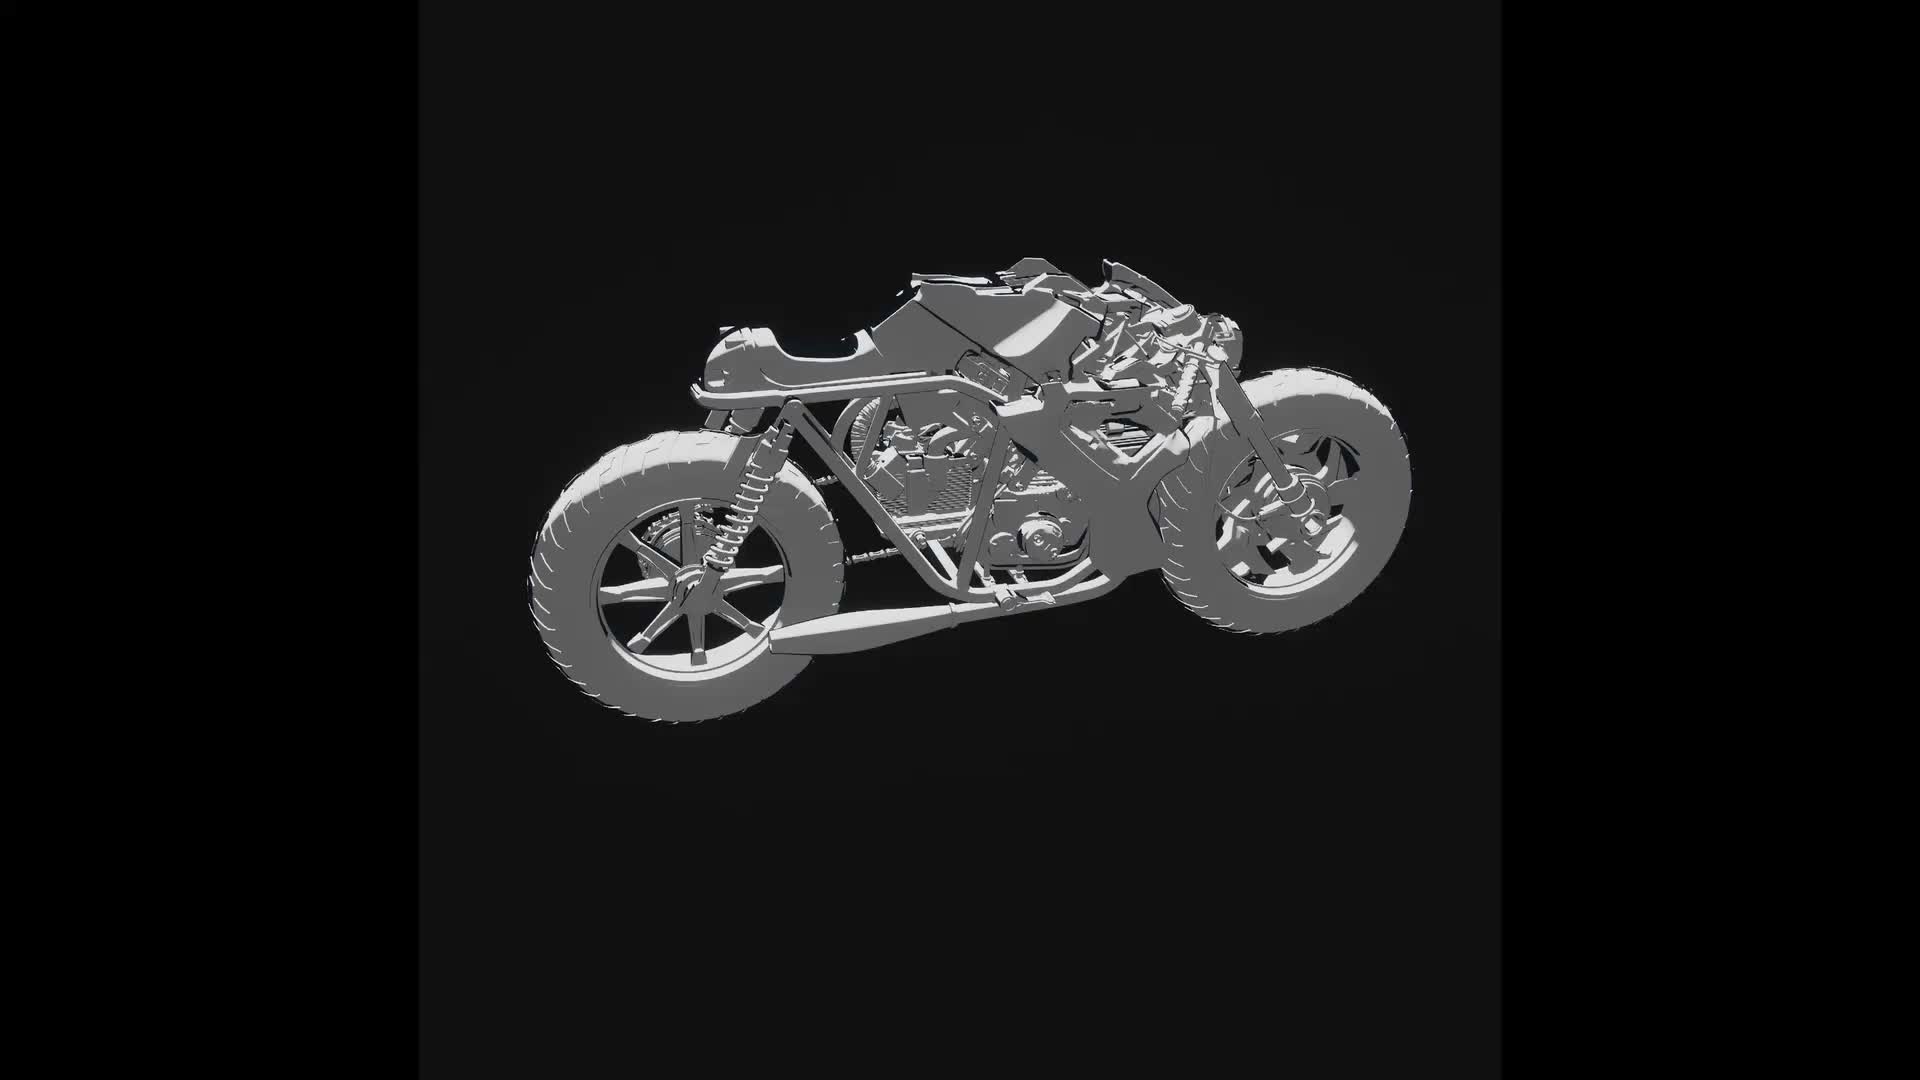 ArtStation - Motorcycle (Black and Red)